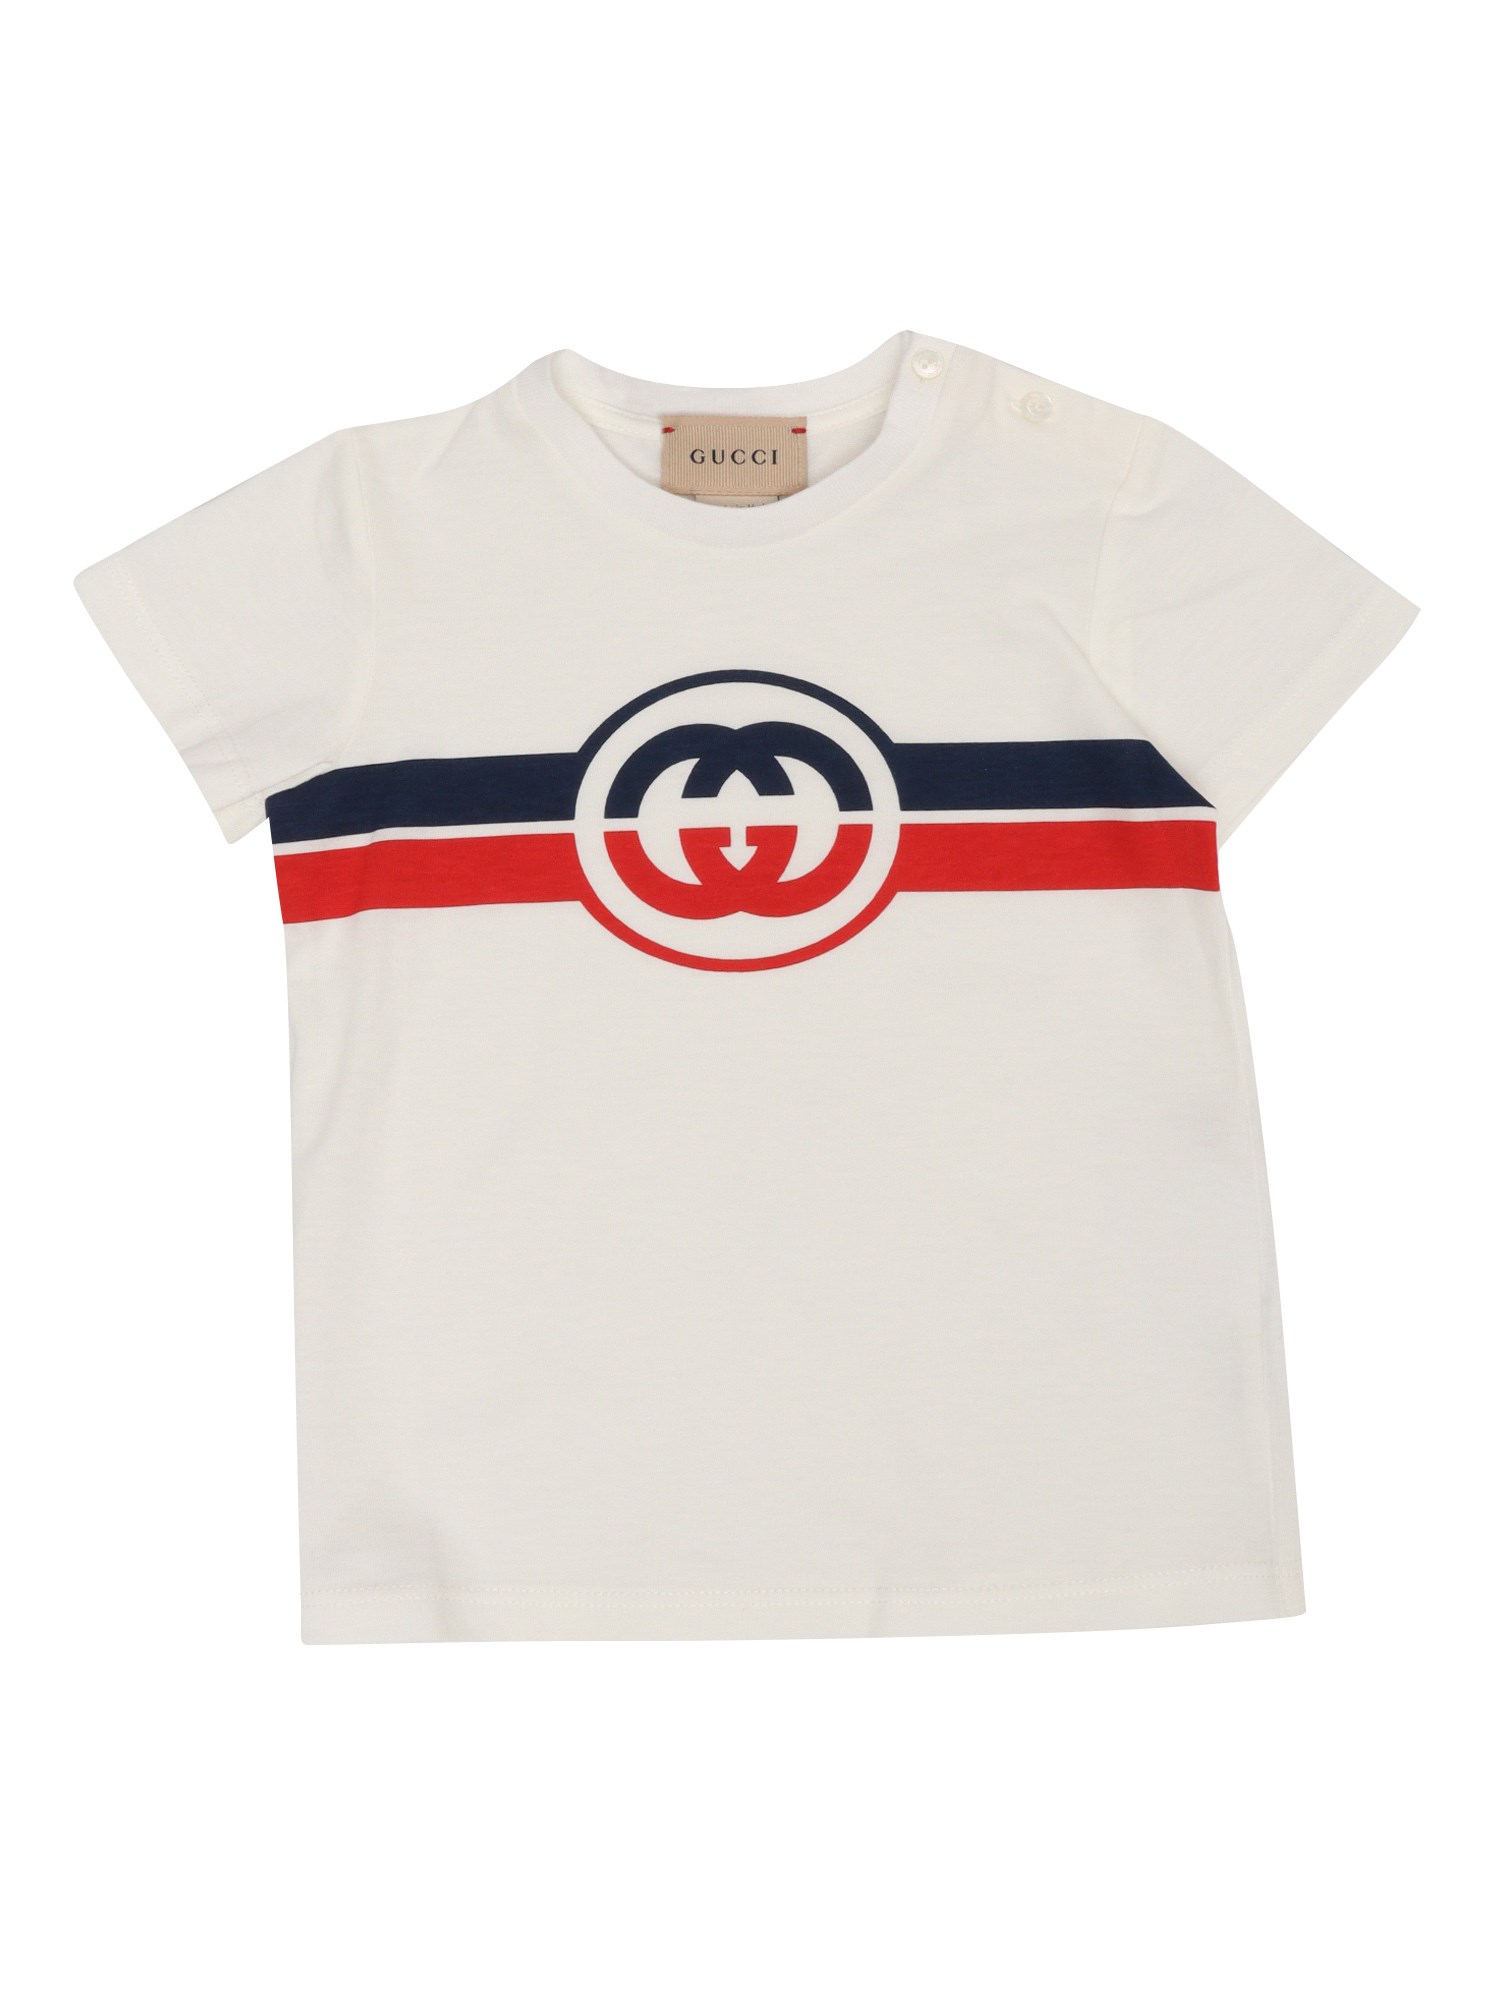 Gucci Gg Cotton T-shirt In White